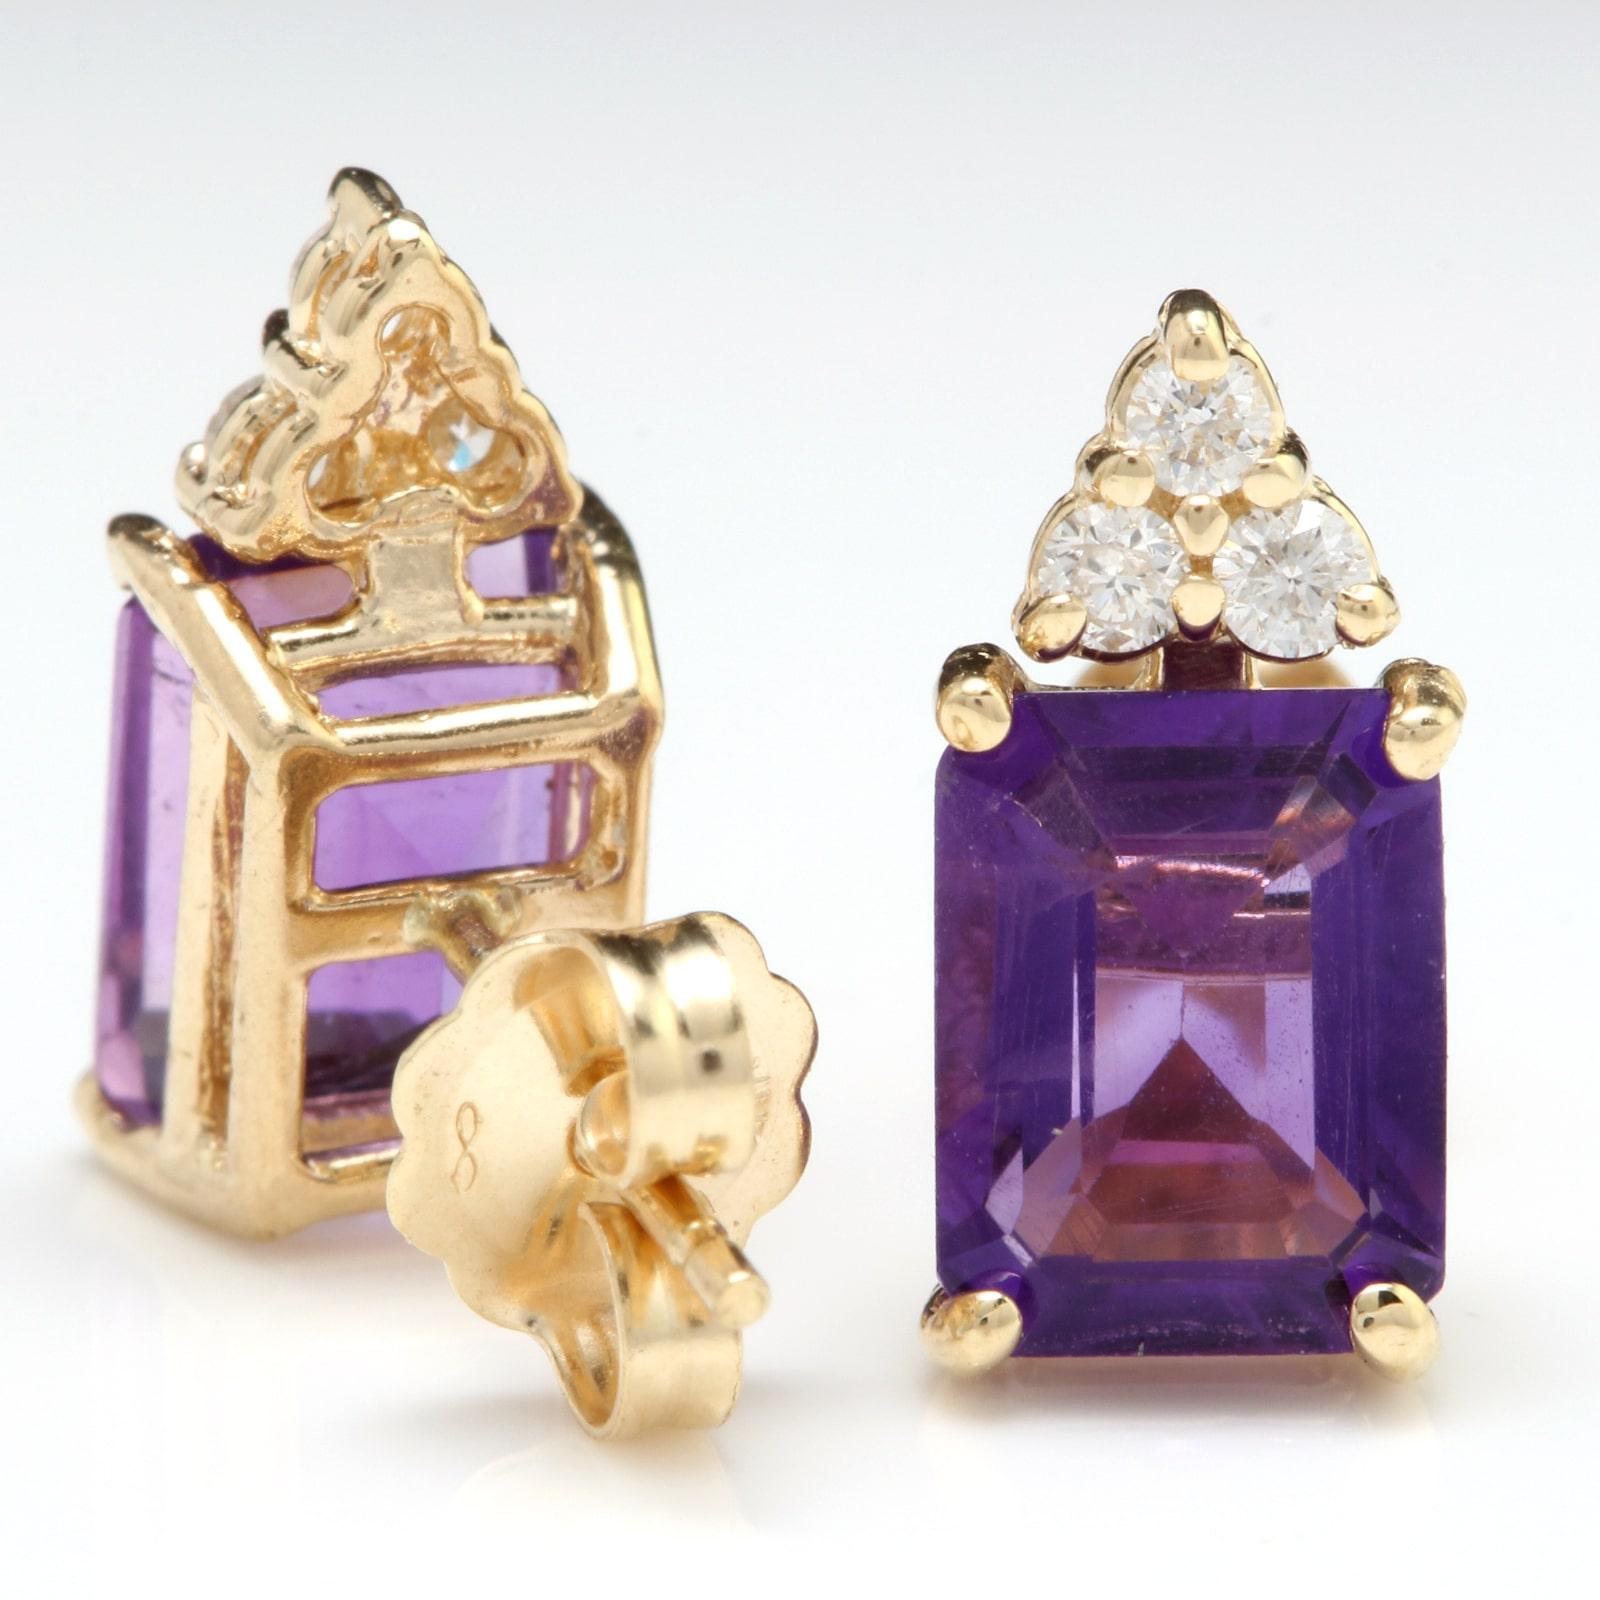 Exquisite 3.20 Carats Natural Amethyst and Diamond 14K Solid Yellow Gold Earrings

Amazing looking piece!

Total Natural Round Cut White Diamonds Weight: Approx. 0.20 Carats (color G-H / Clarity SI1-SI2)

Total Natural Emerald Cut Amethyst Weight: